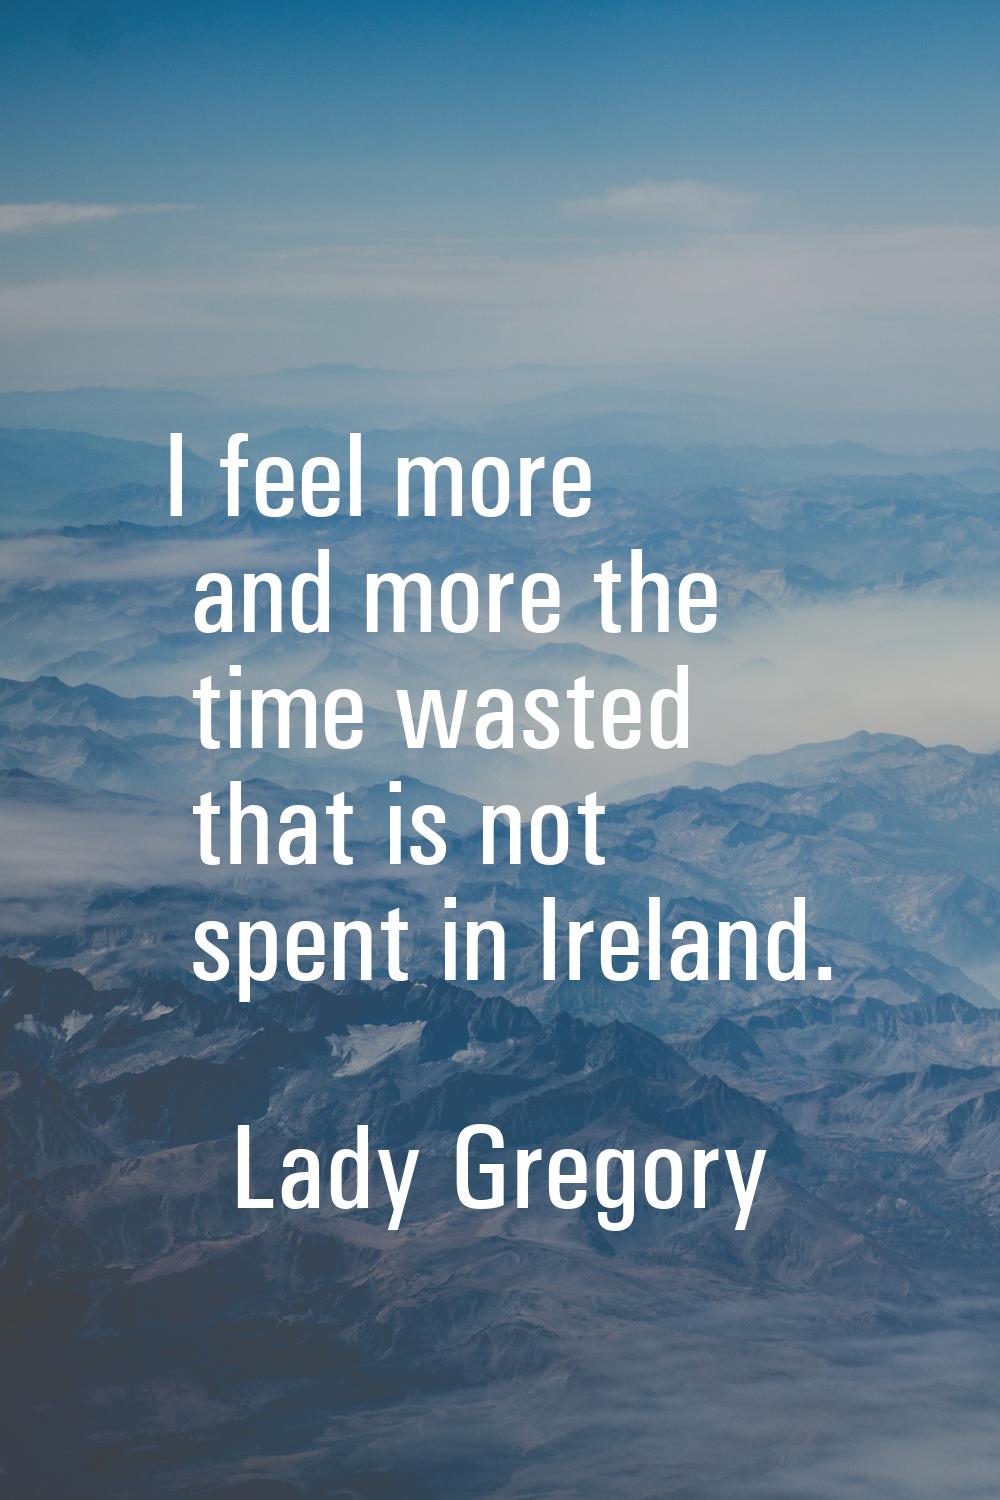 I feel more and more the time wasted that is not spent in Ireland.